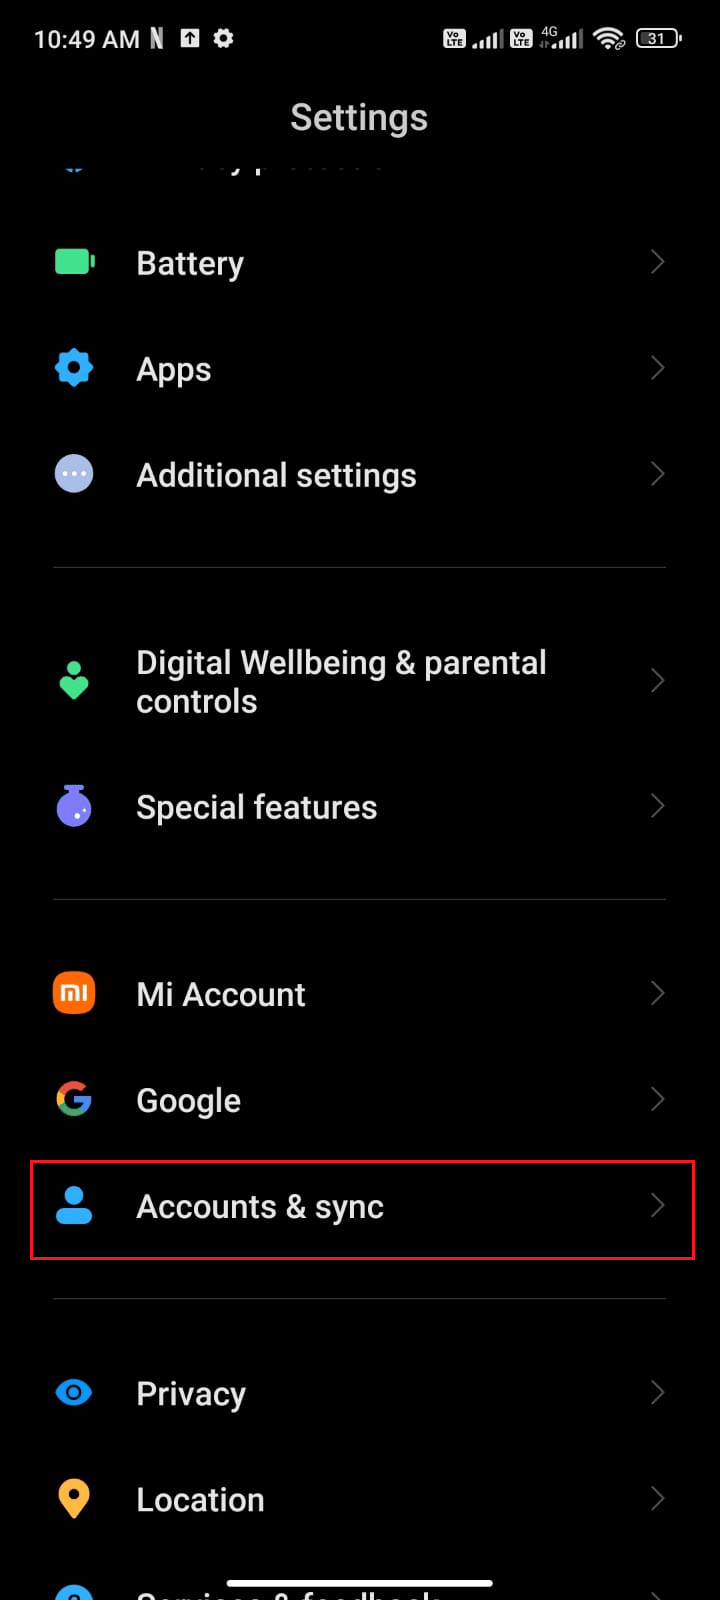 Scroll down the Settings screen and tap Accounts and sync. Fix Facebook Session Expired Error